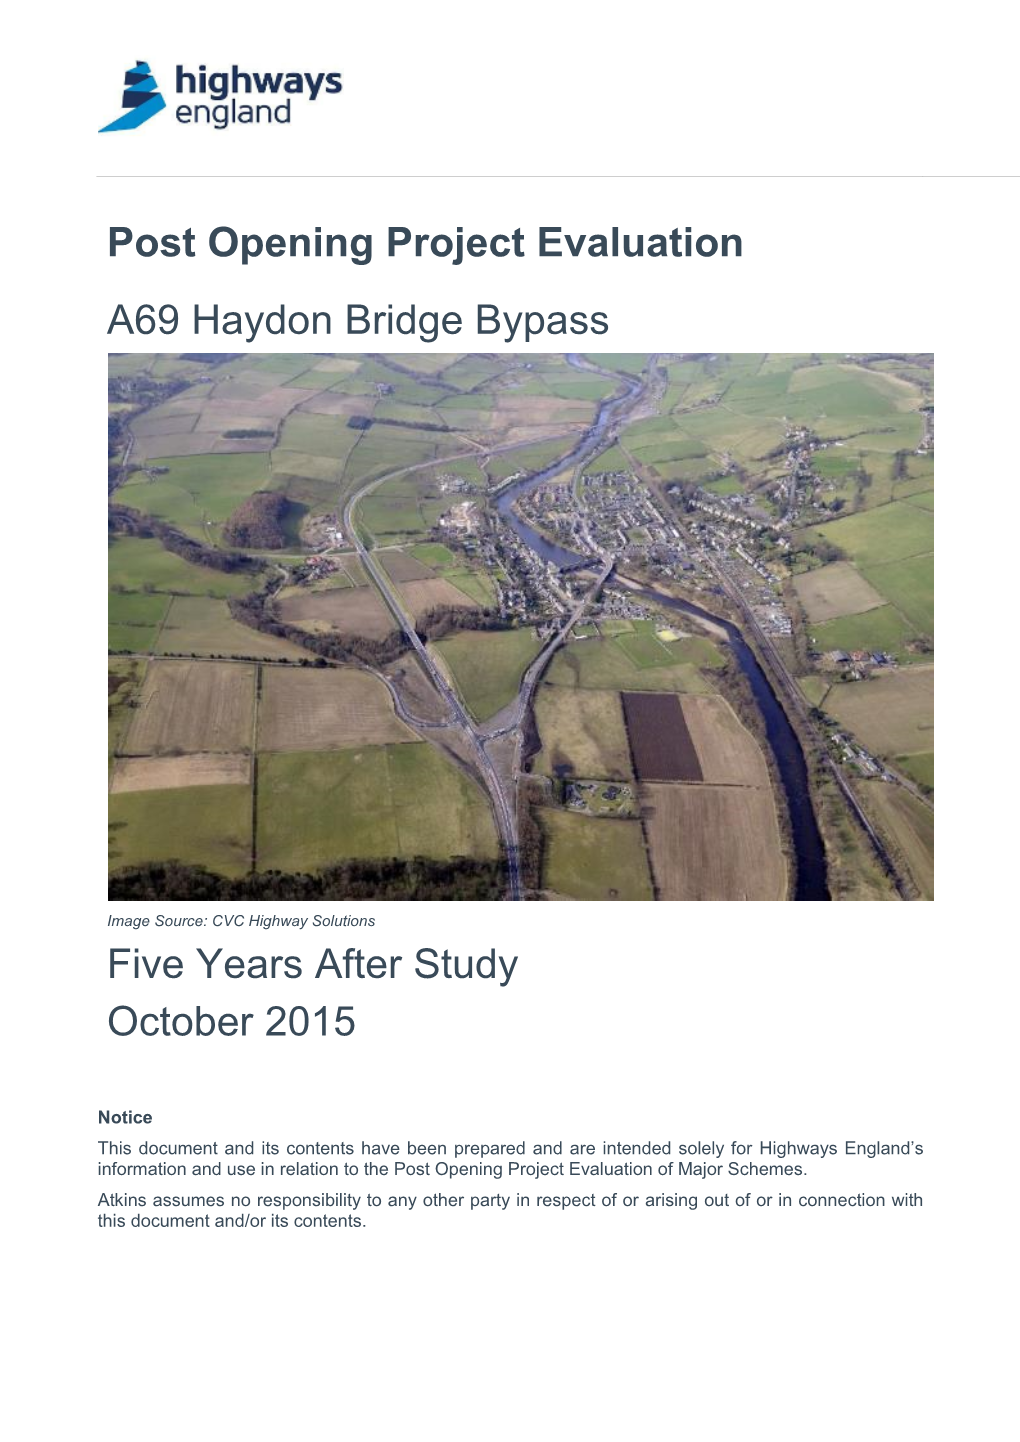 Post Opening Project Evaluation A69 Haydon Bridge Bypass Five Years After Study